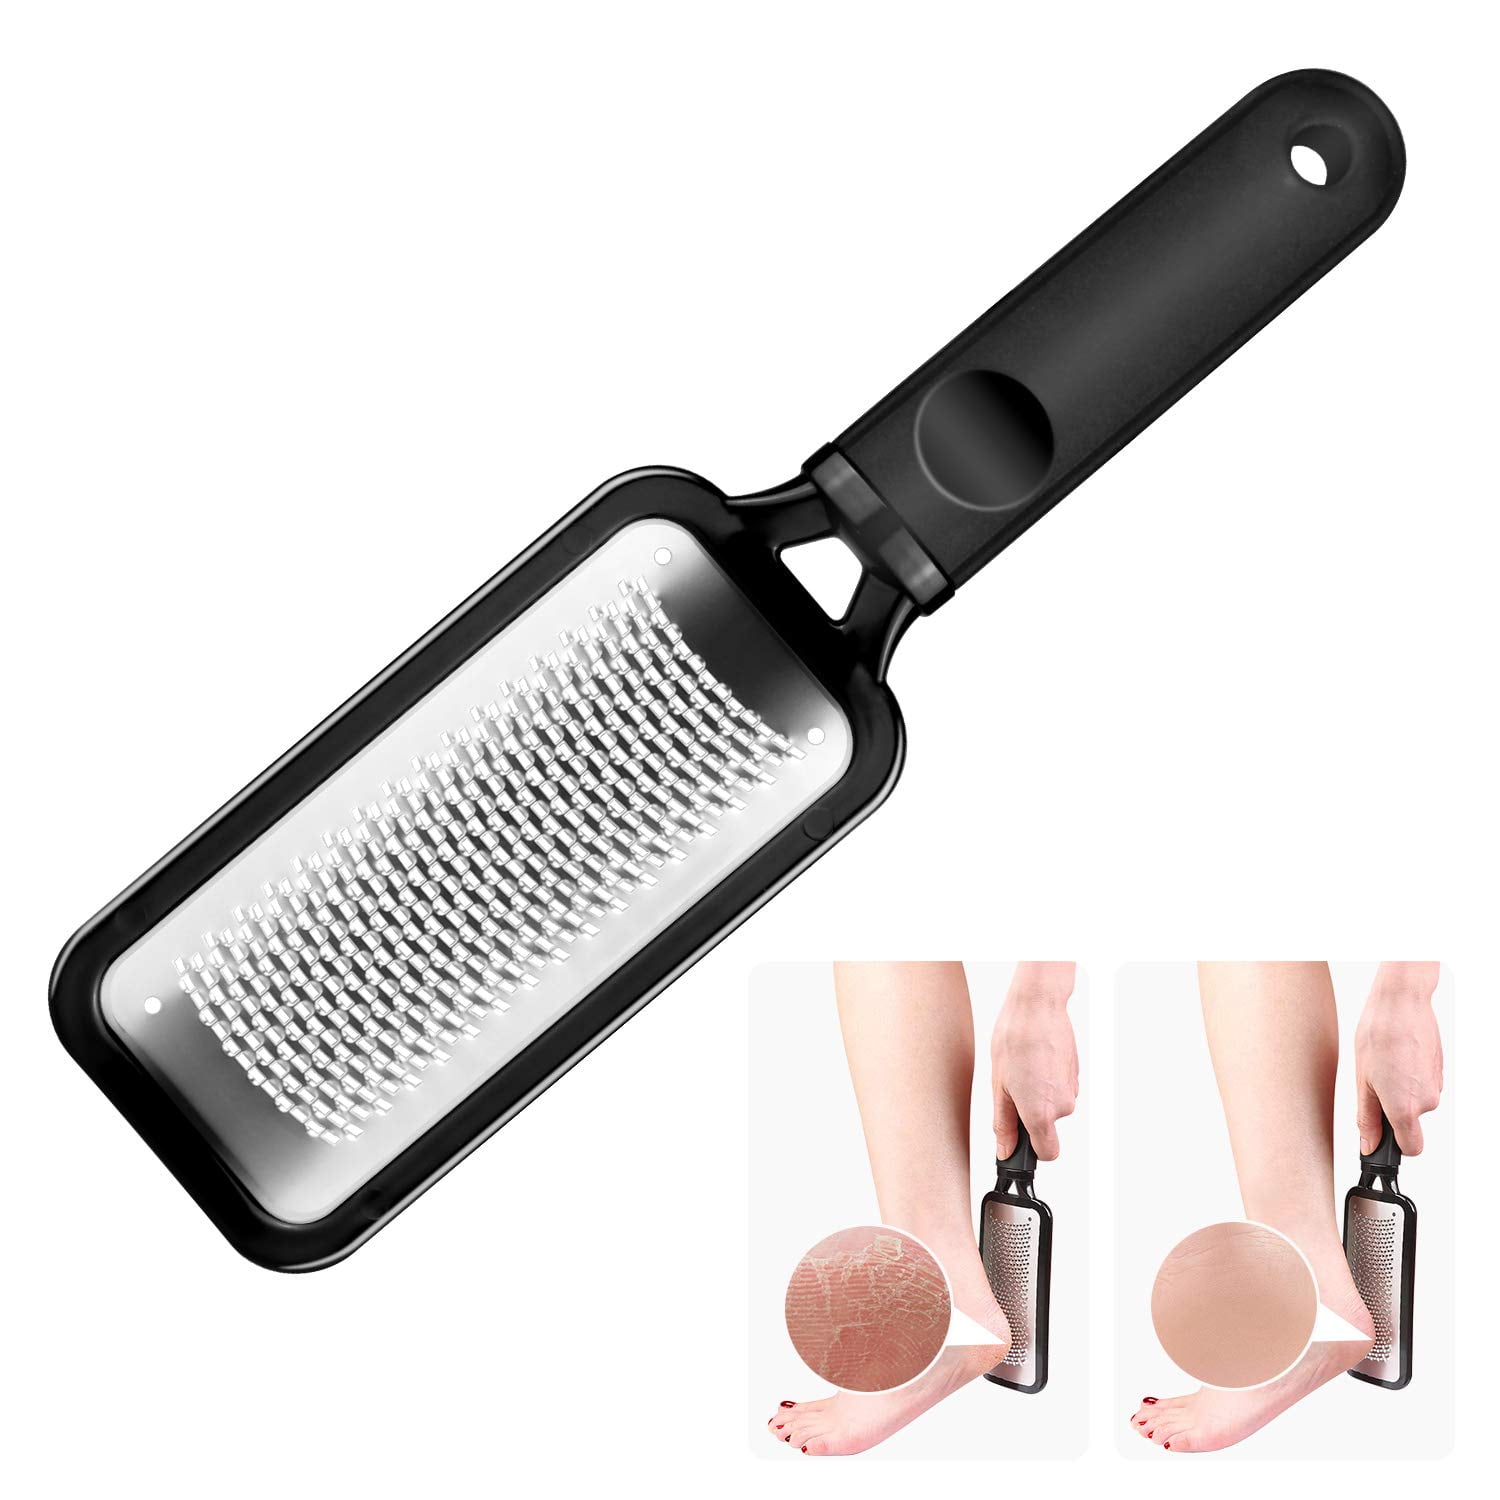 DYNESSE Foot File. Best Premium Pedicure Foot Rasp and Callus Remover.  3-in-1 Tool. Removes Hard Skin. No Risk of Injury. Stainless Steel.  Ergonomic